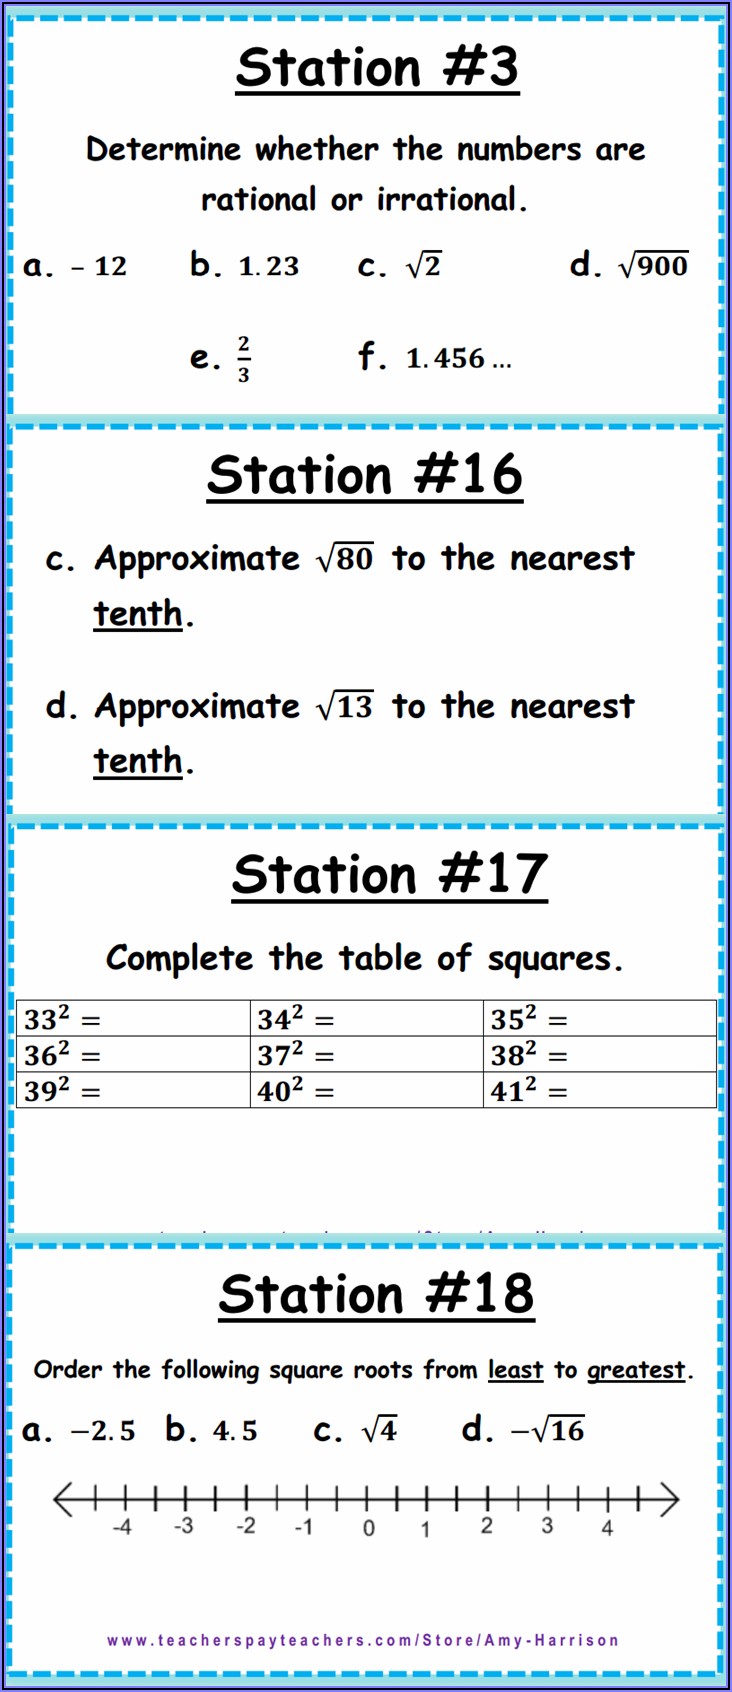 Rationalirrational Numbers Worksheet Answers